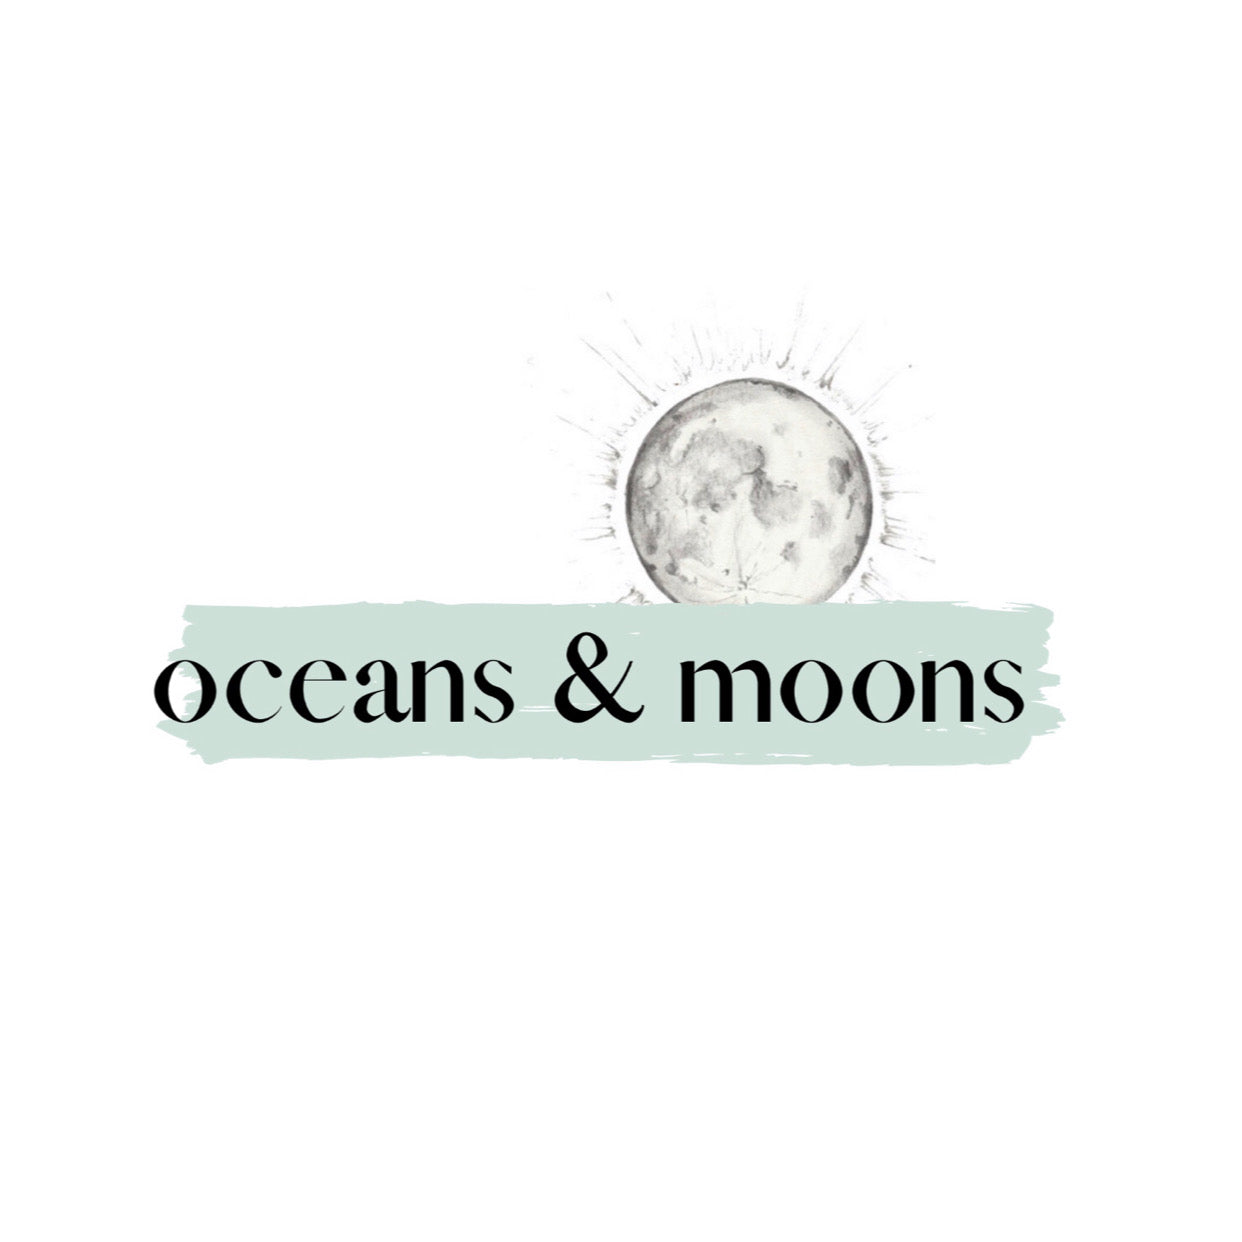 Oceans and moons